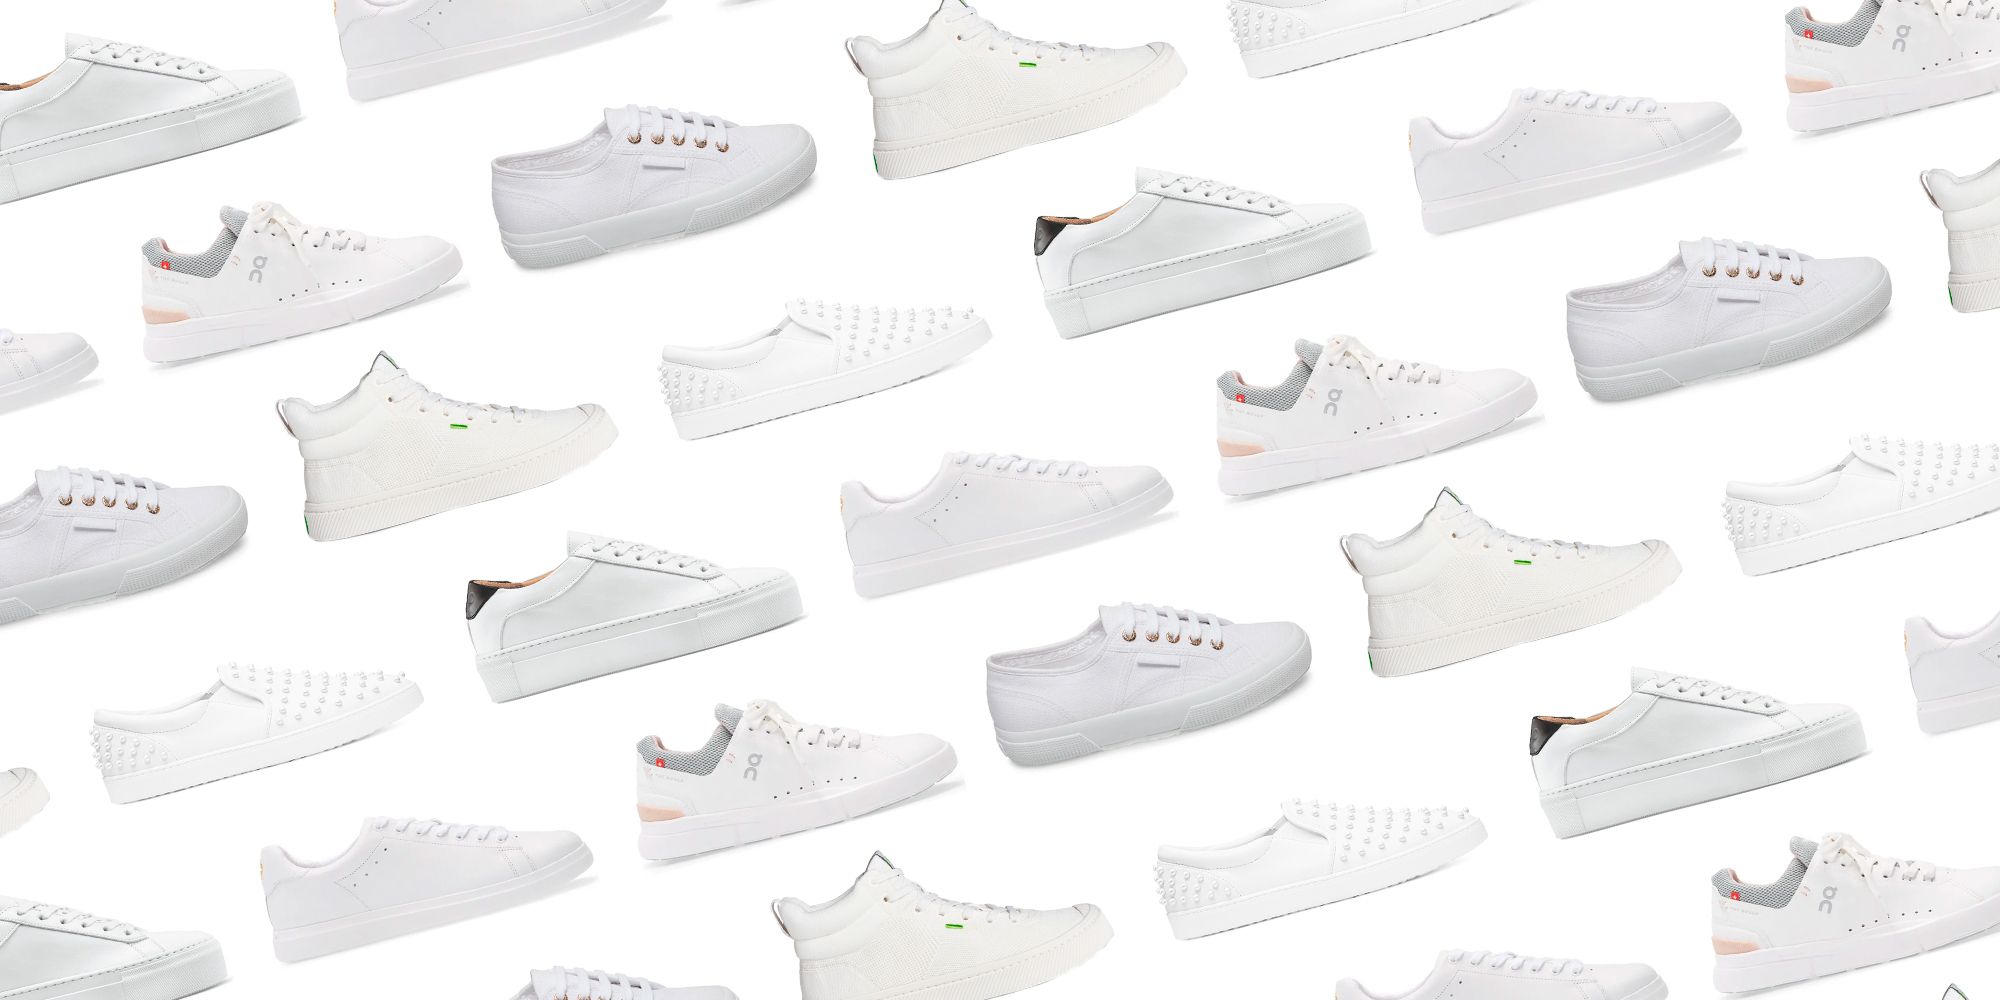 white leather sneakers womens